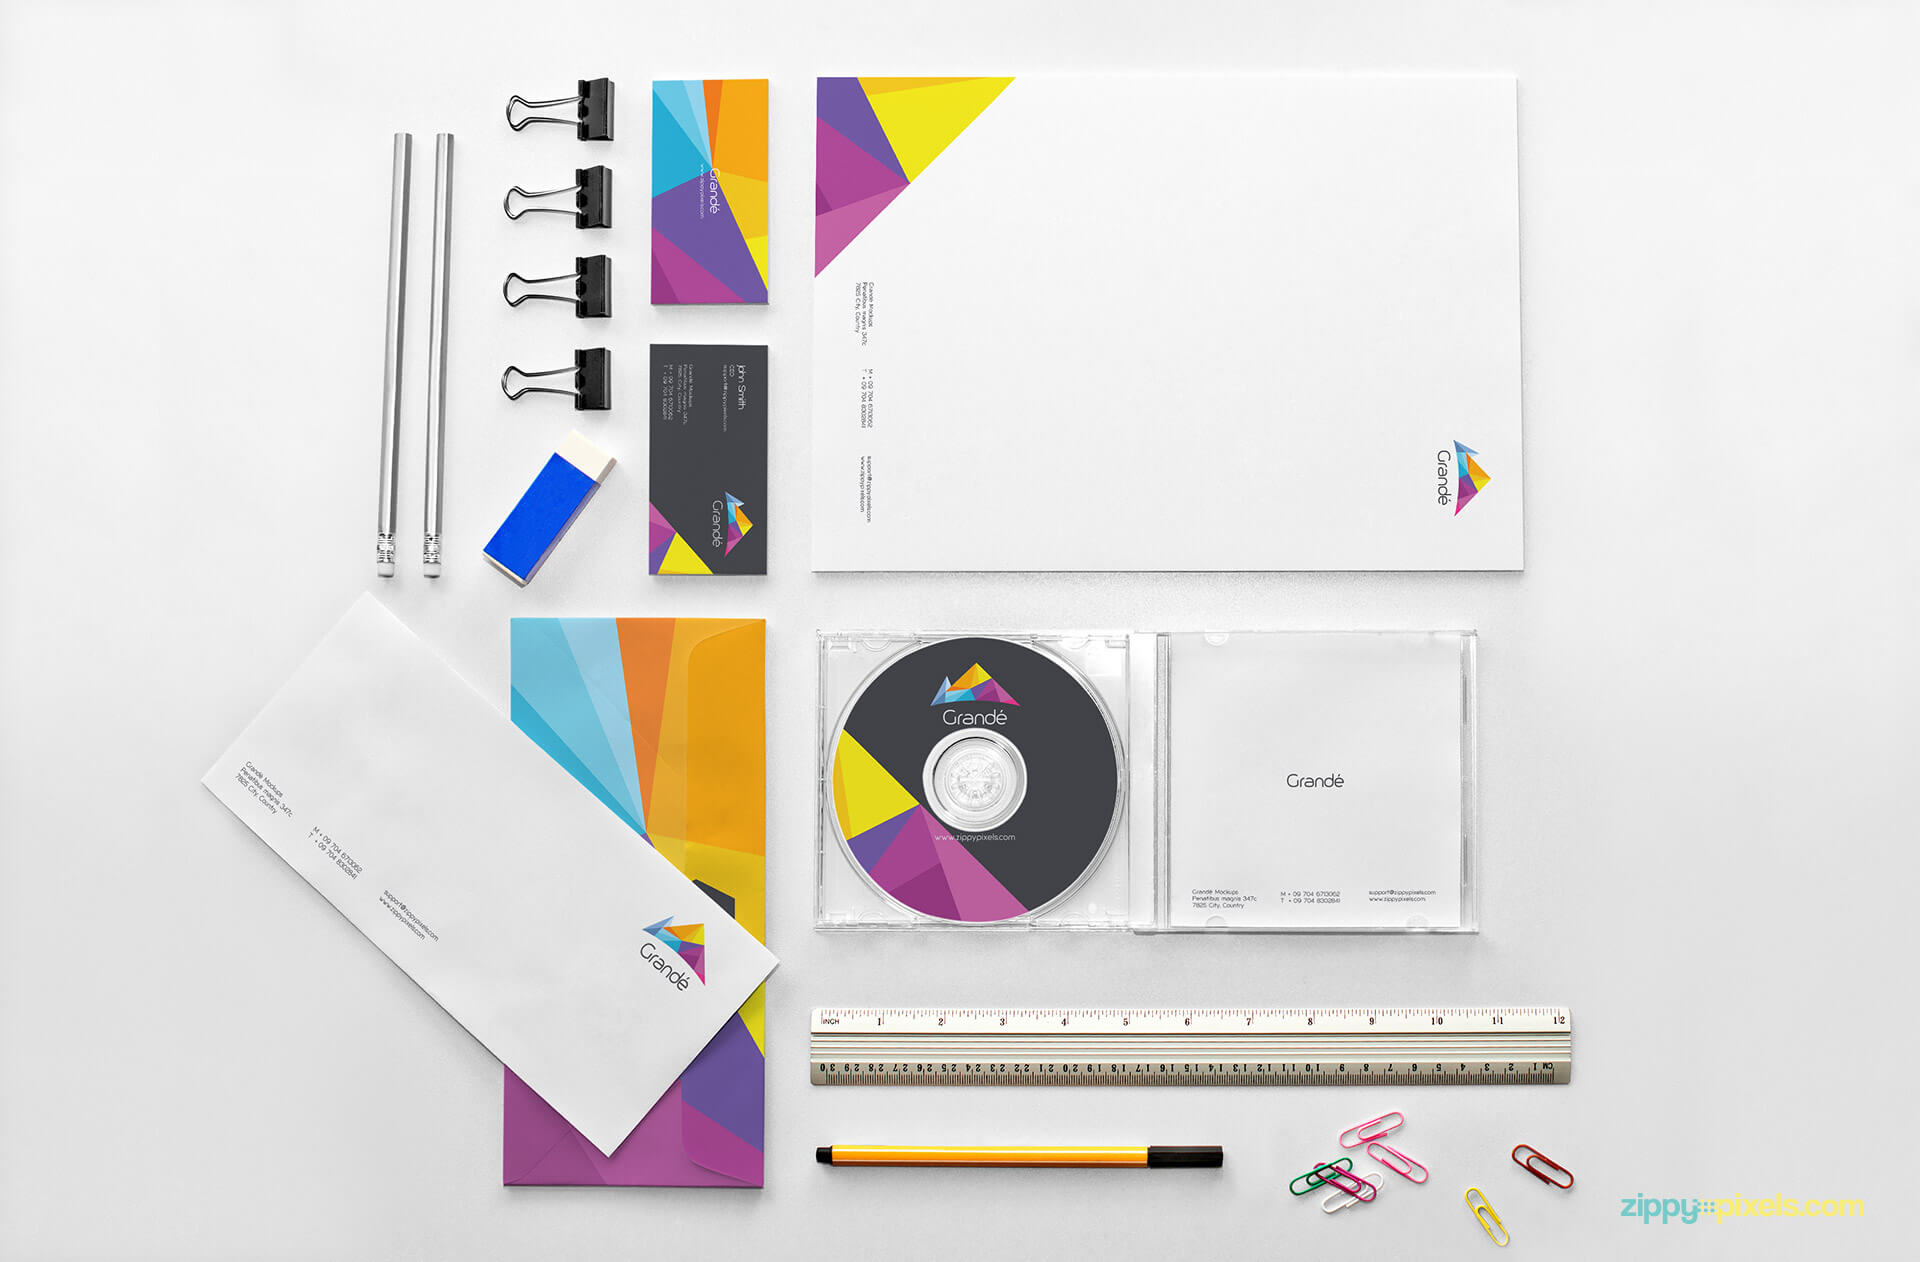 Full Stationery Set Identity Mockup; Business Cards, Letterhead, CD Cover, Evelopes, Ruler, Paper Clips, Pencils